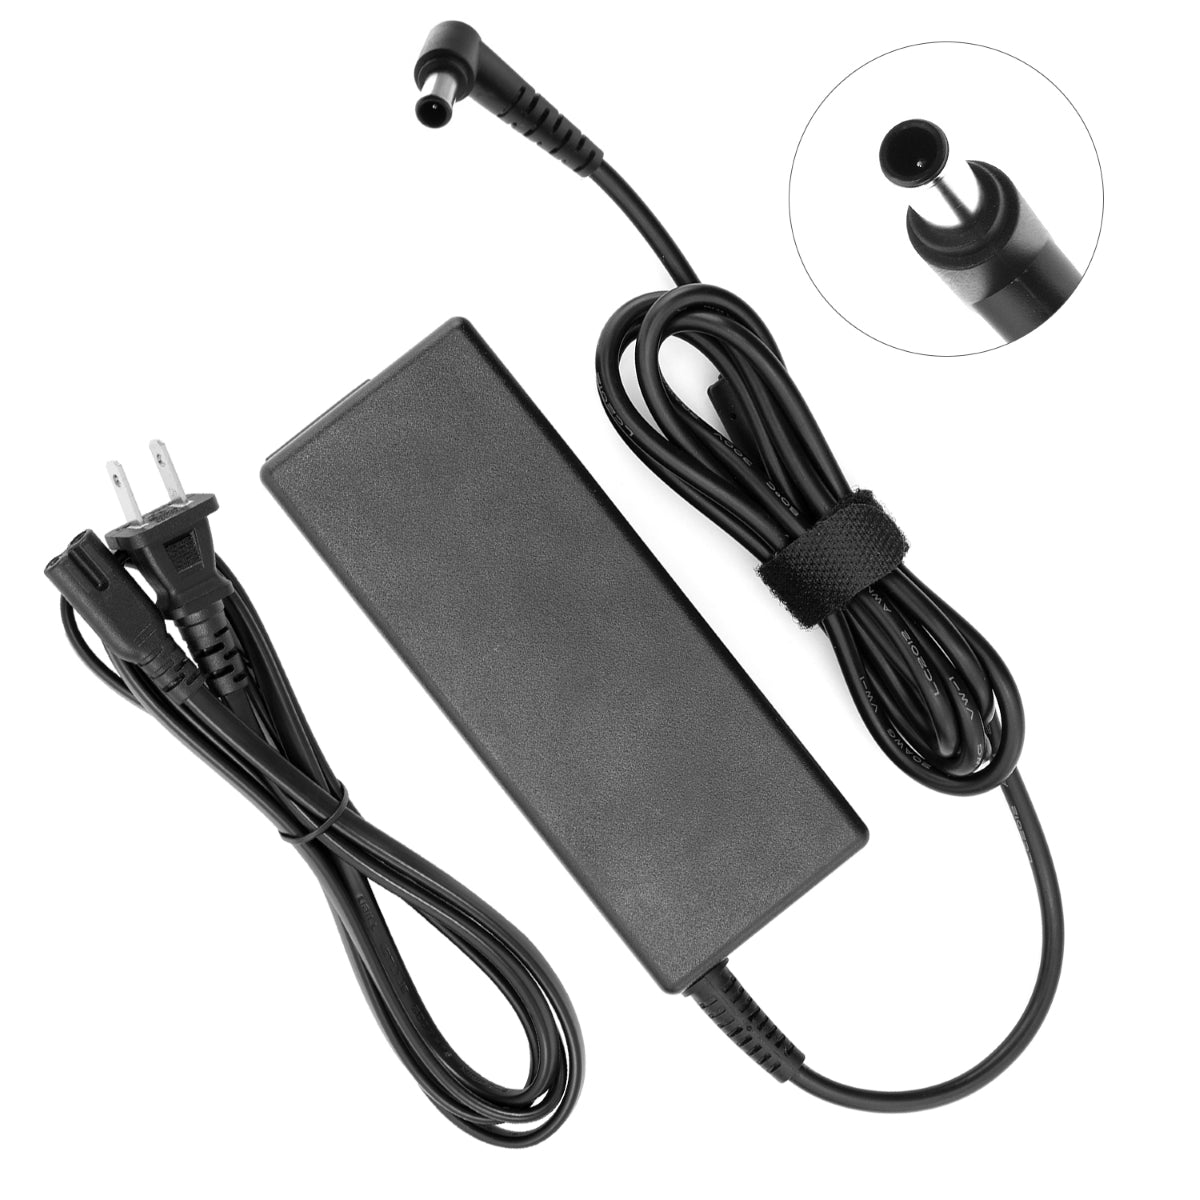 Power Adapter for LG 27UL600-W Monitor TV